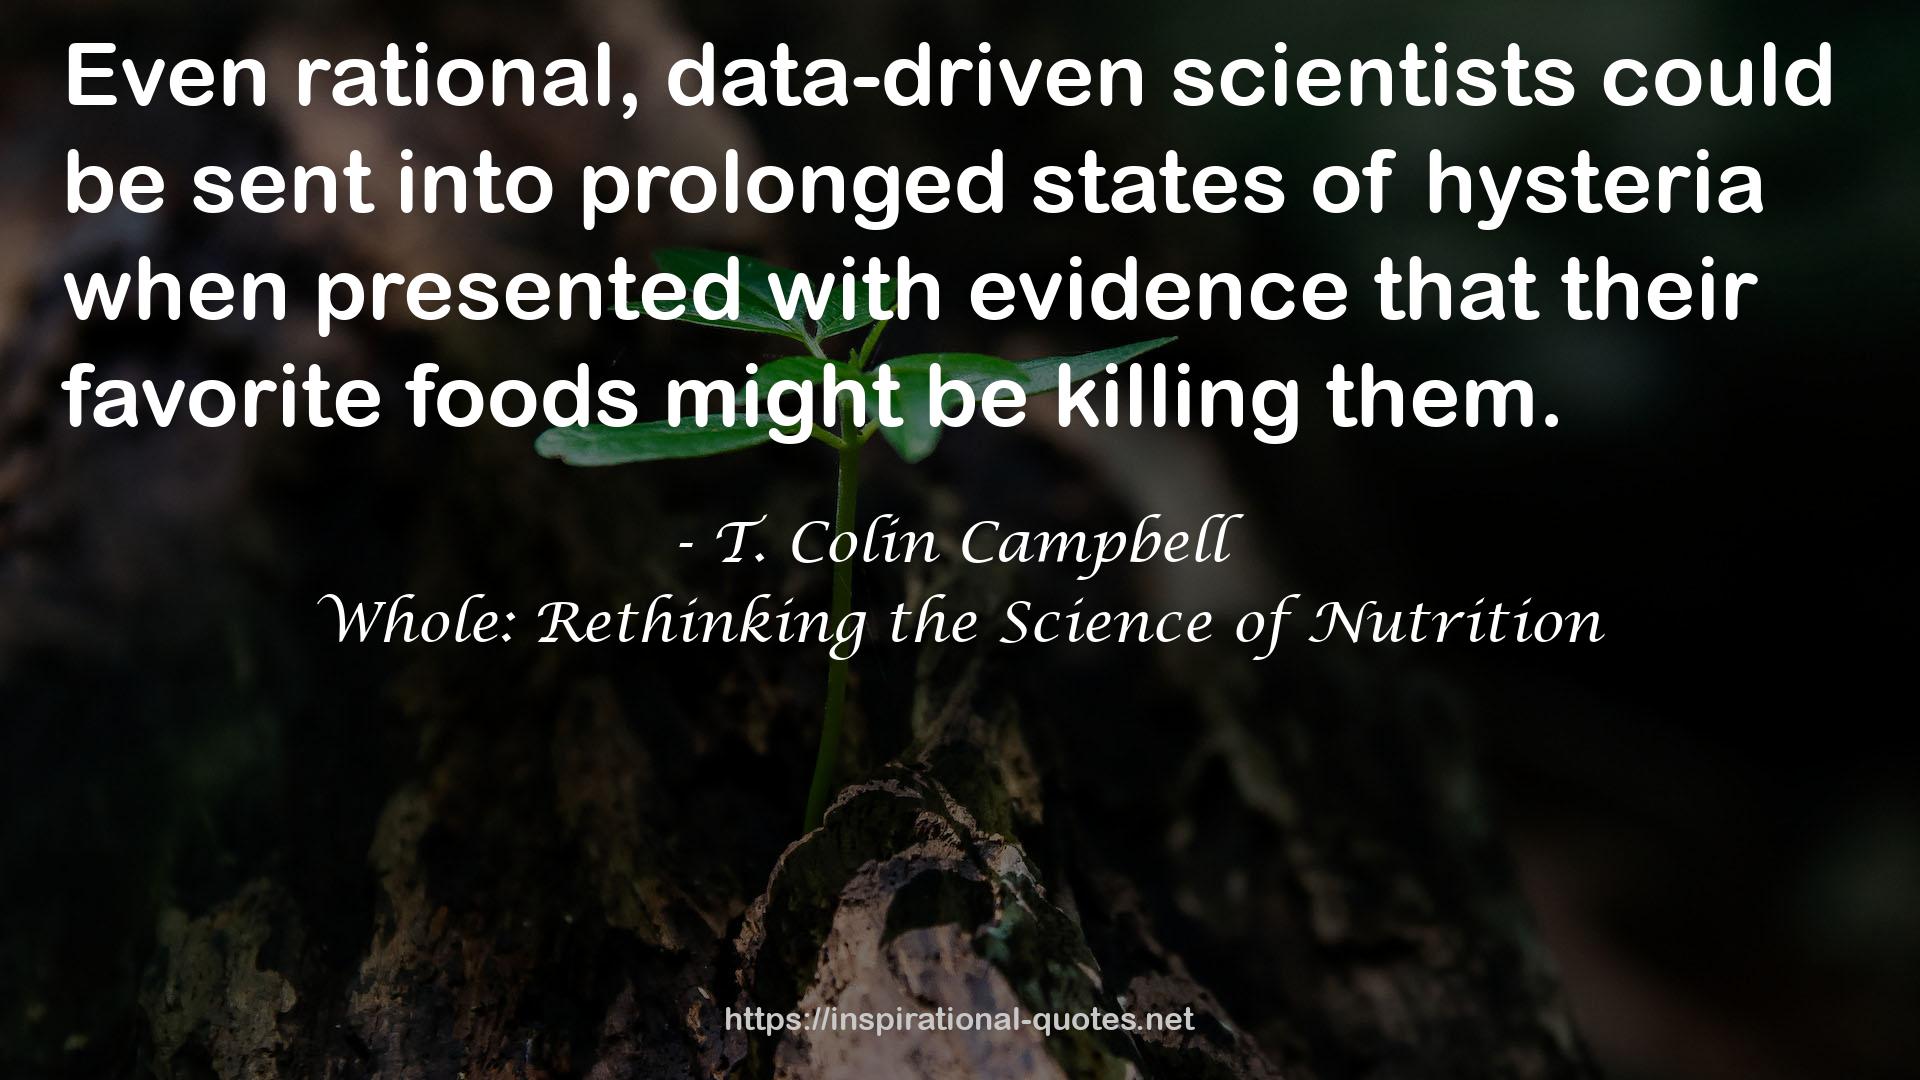 Whole: Rethinking the Science of Nutrition QUOTES